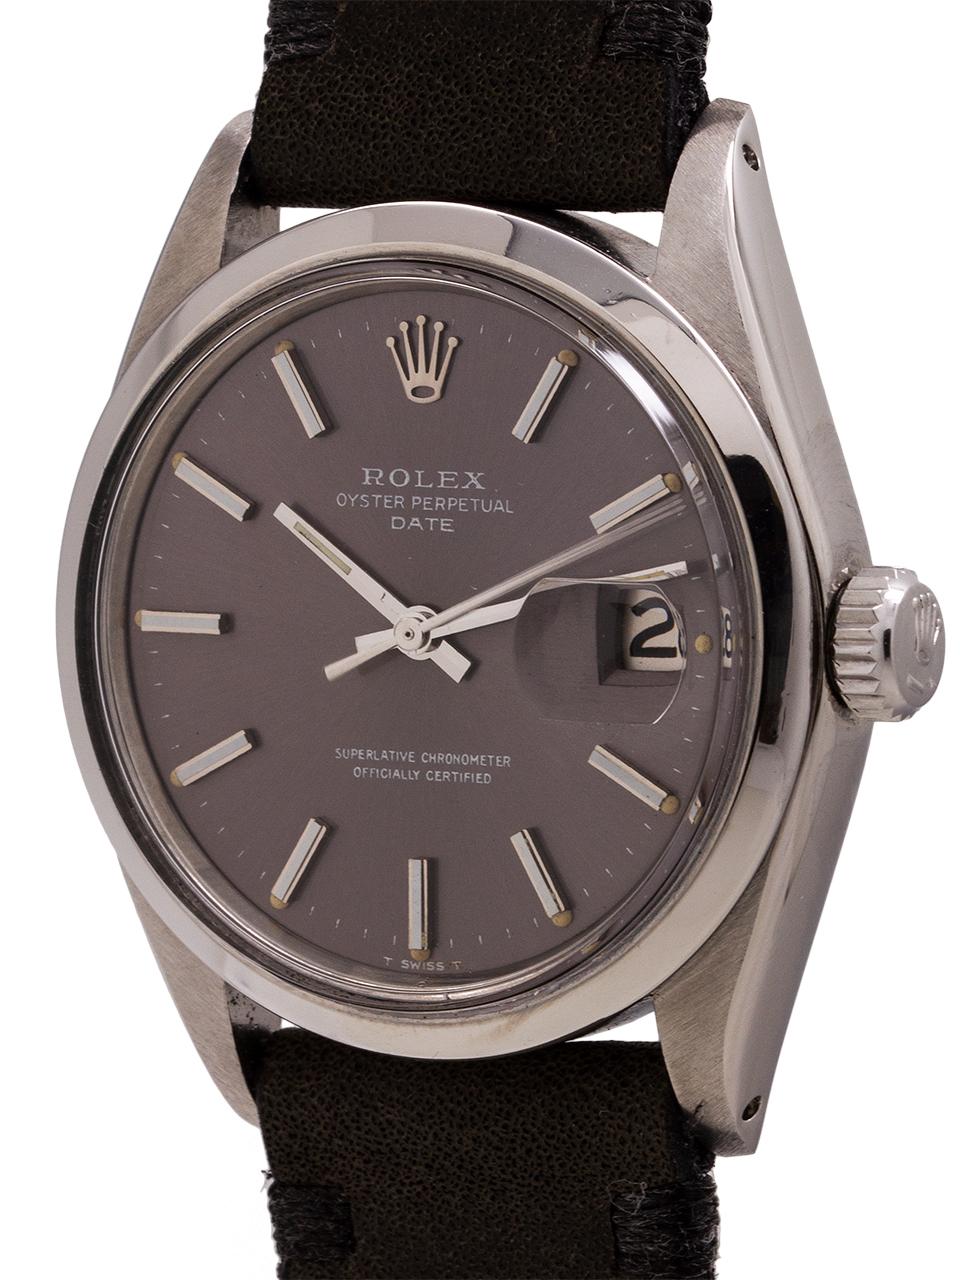 Rolex Oyster Perpetual Date ref 1500 circa 1968. Featuring 34mm diameter case with smooth bezel, acrylic crystal, and original dark grey dial with applied silver indexes and silver baton hands. The stainless steel case was recently detailed, but